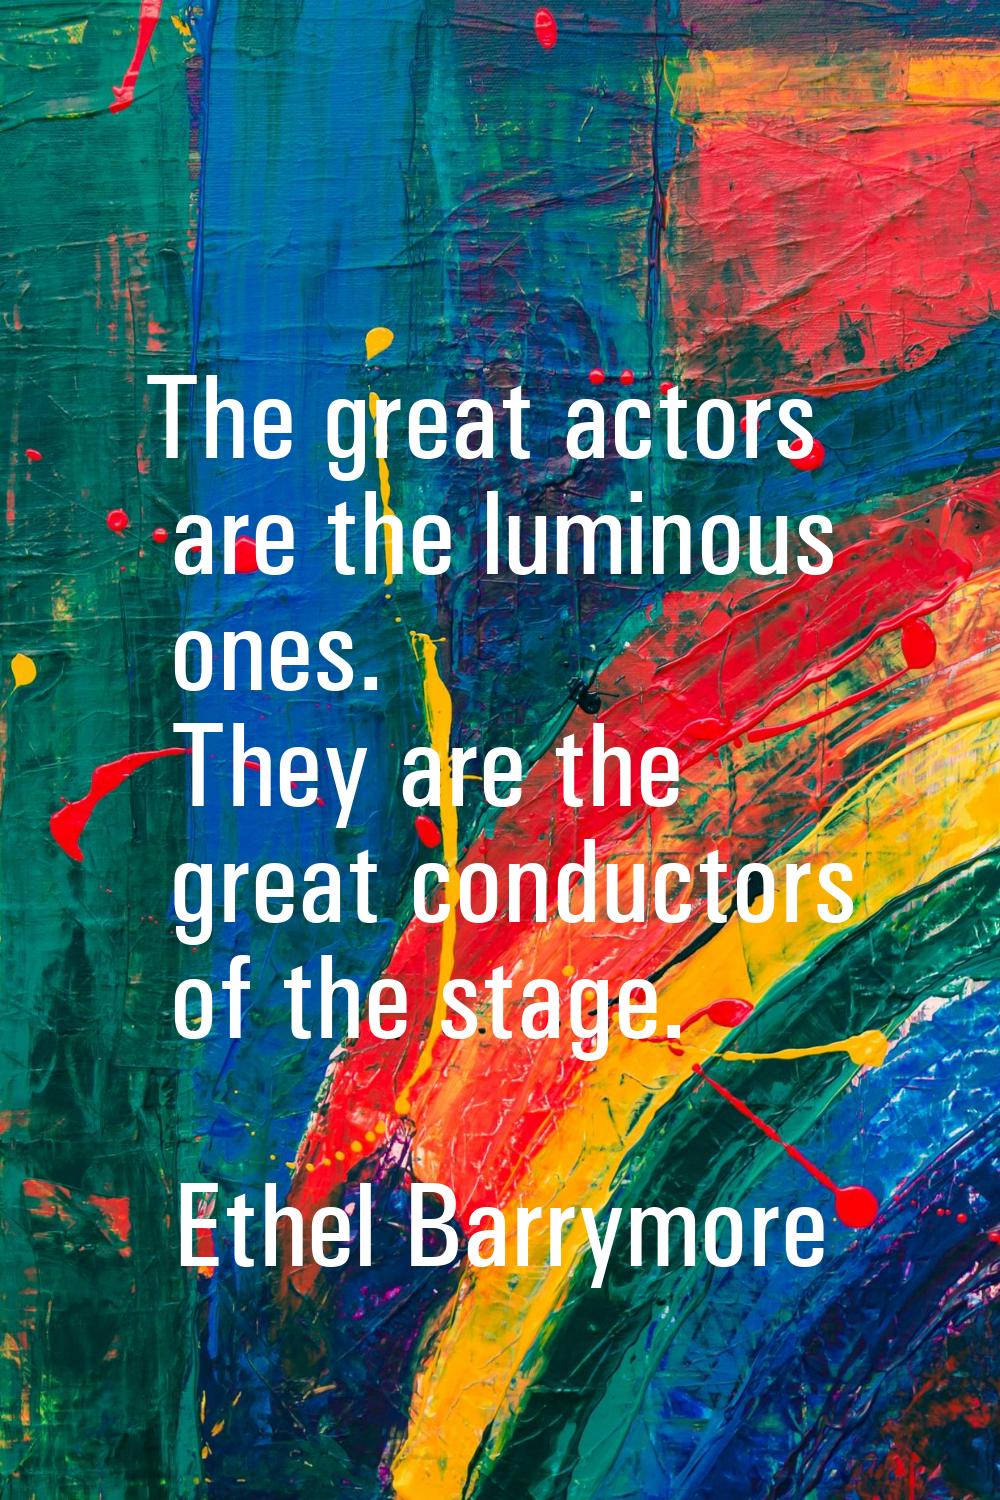 The great actors are the luminous ones. They are the great conductors of the stage.